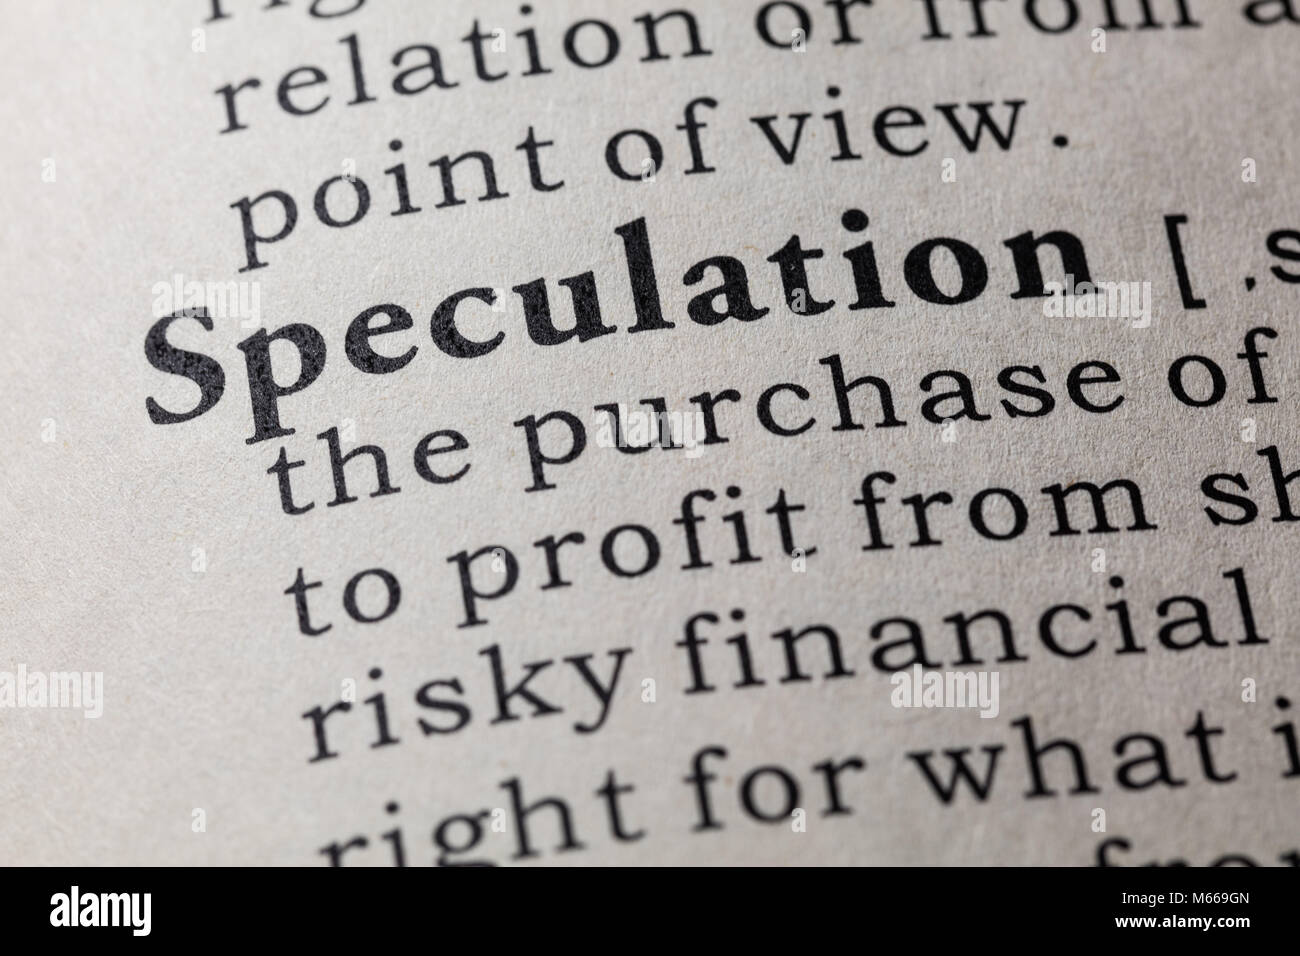 Fake Dictionary, Dictionary definition of the word speculation. including key descriptive words. Stock Photo